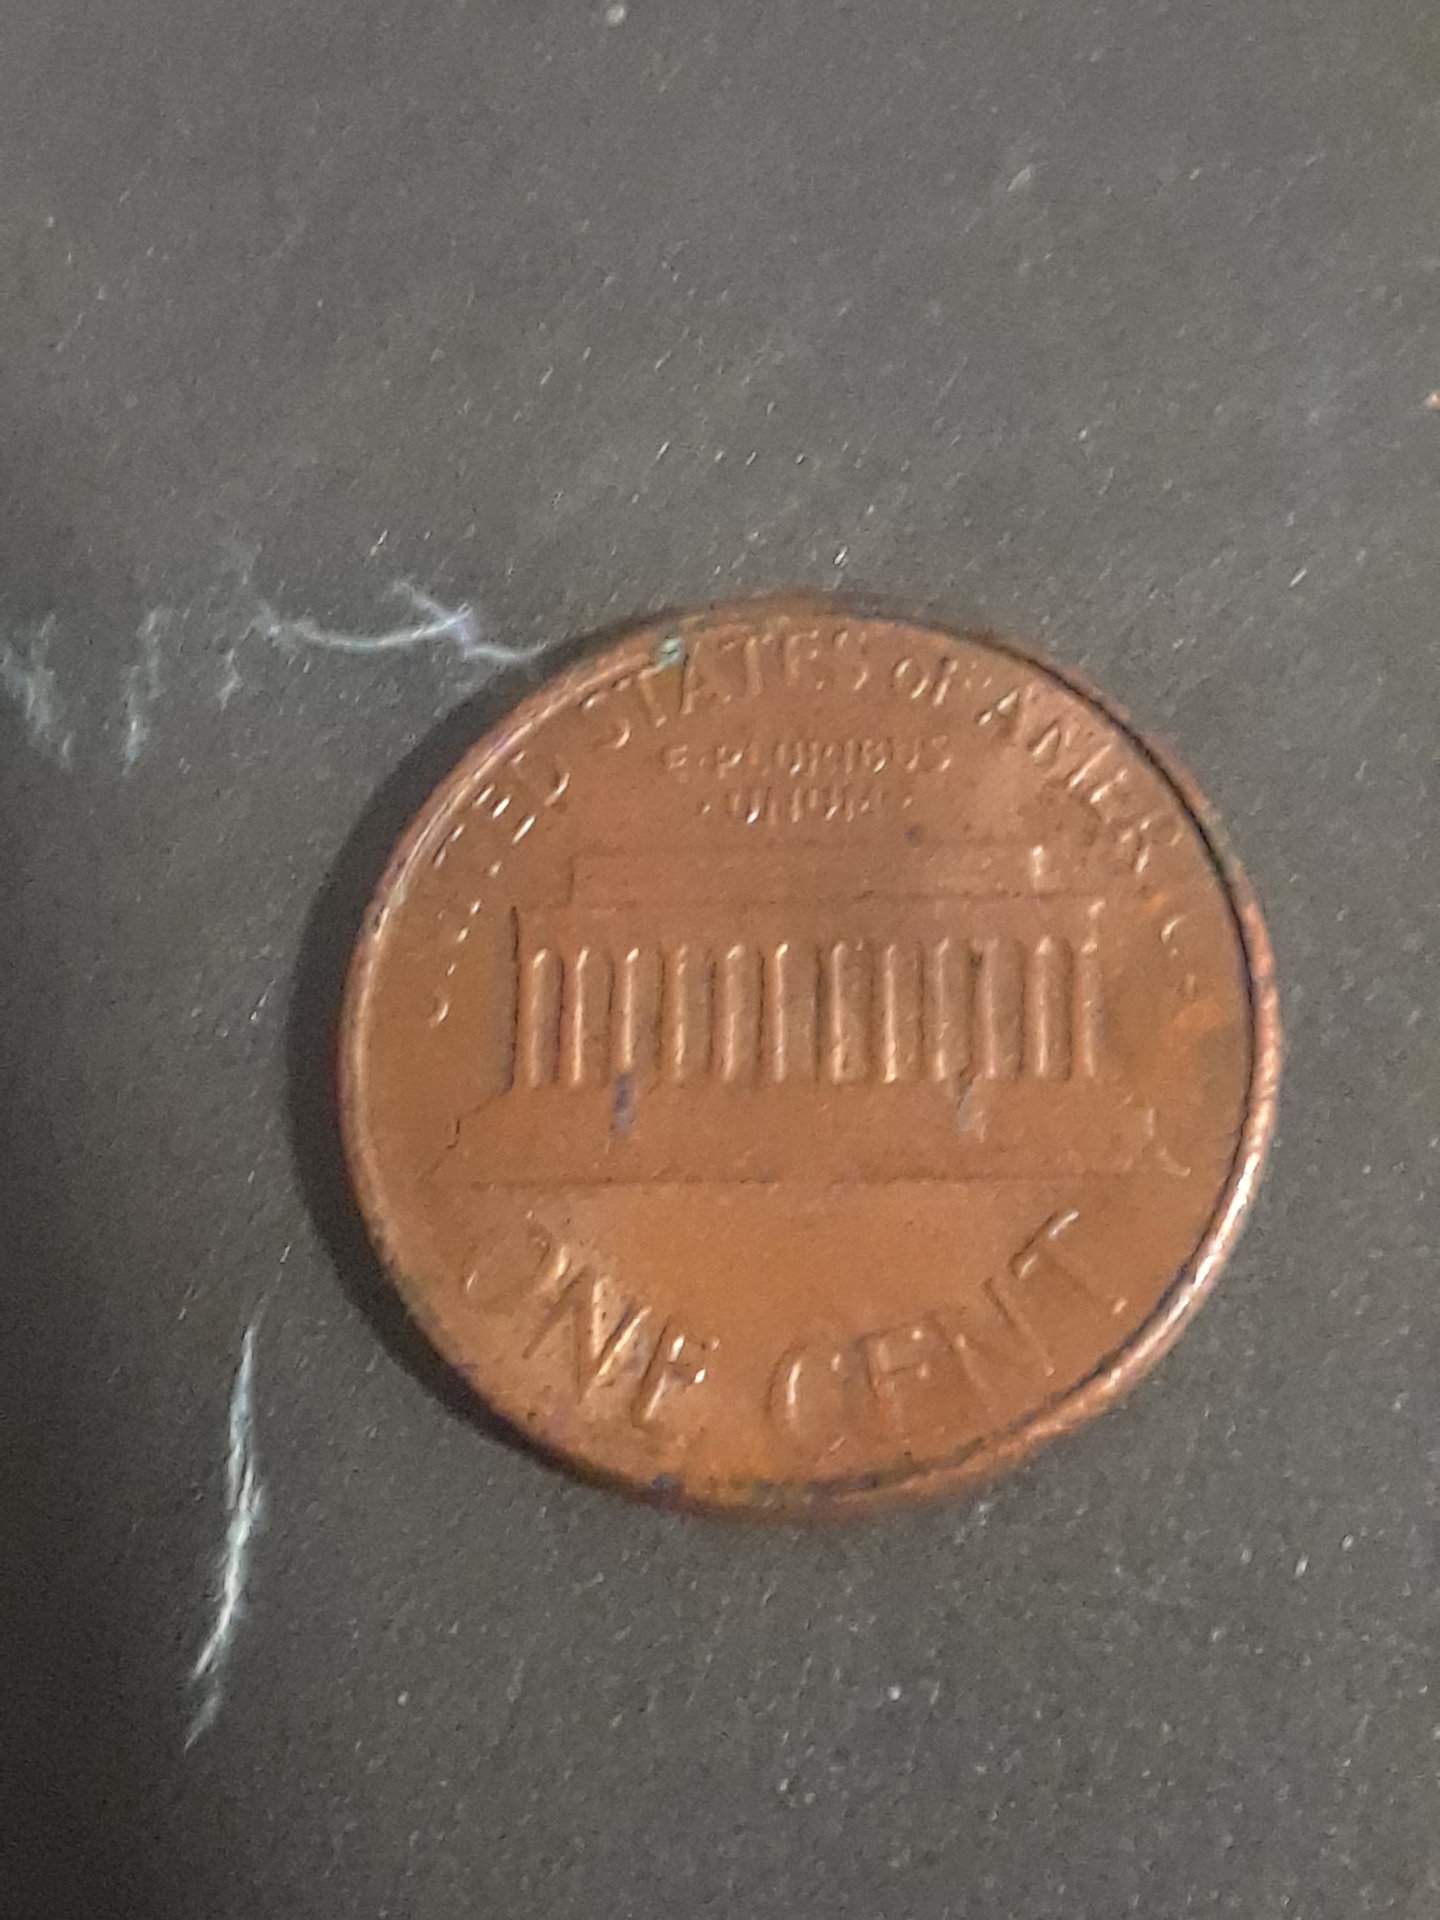 I found a 1988 D penny and it does not have FG on the back??? | Coin Talk